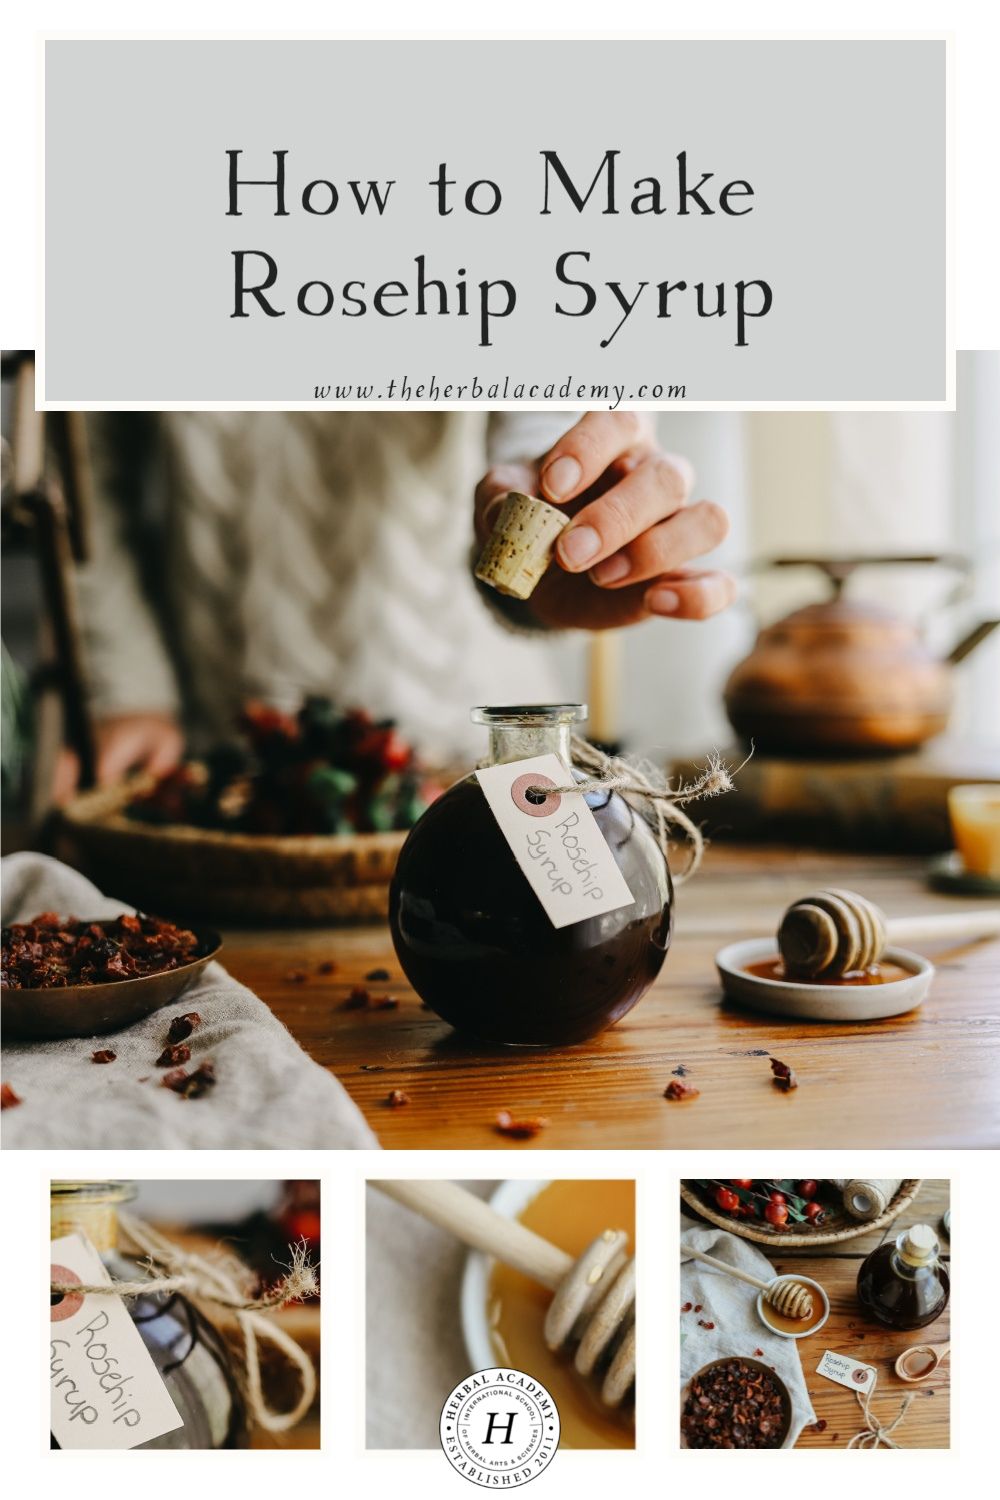 How to Make Rosehip Syrup | Herbal Academy | This rosehip syrup recipe is a delightful tonic and delicious way to nourish the heart and get your daily intake of vitamin C.